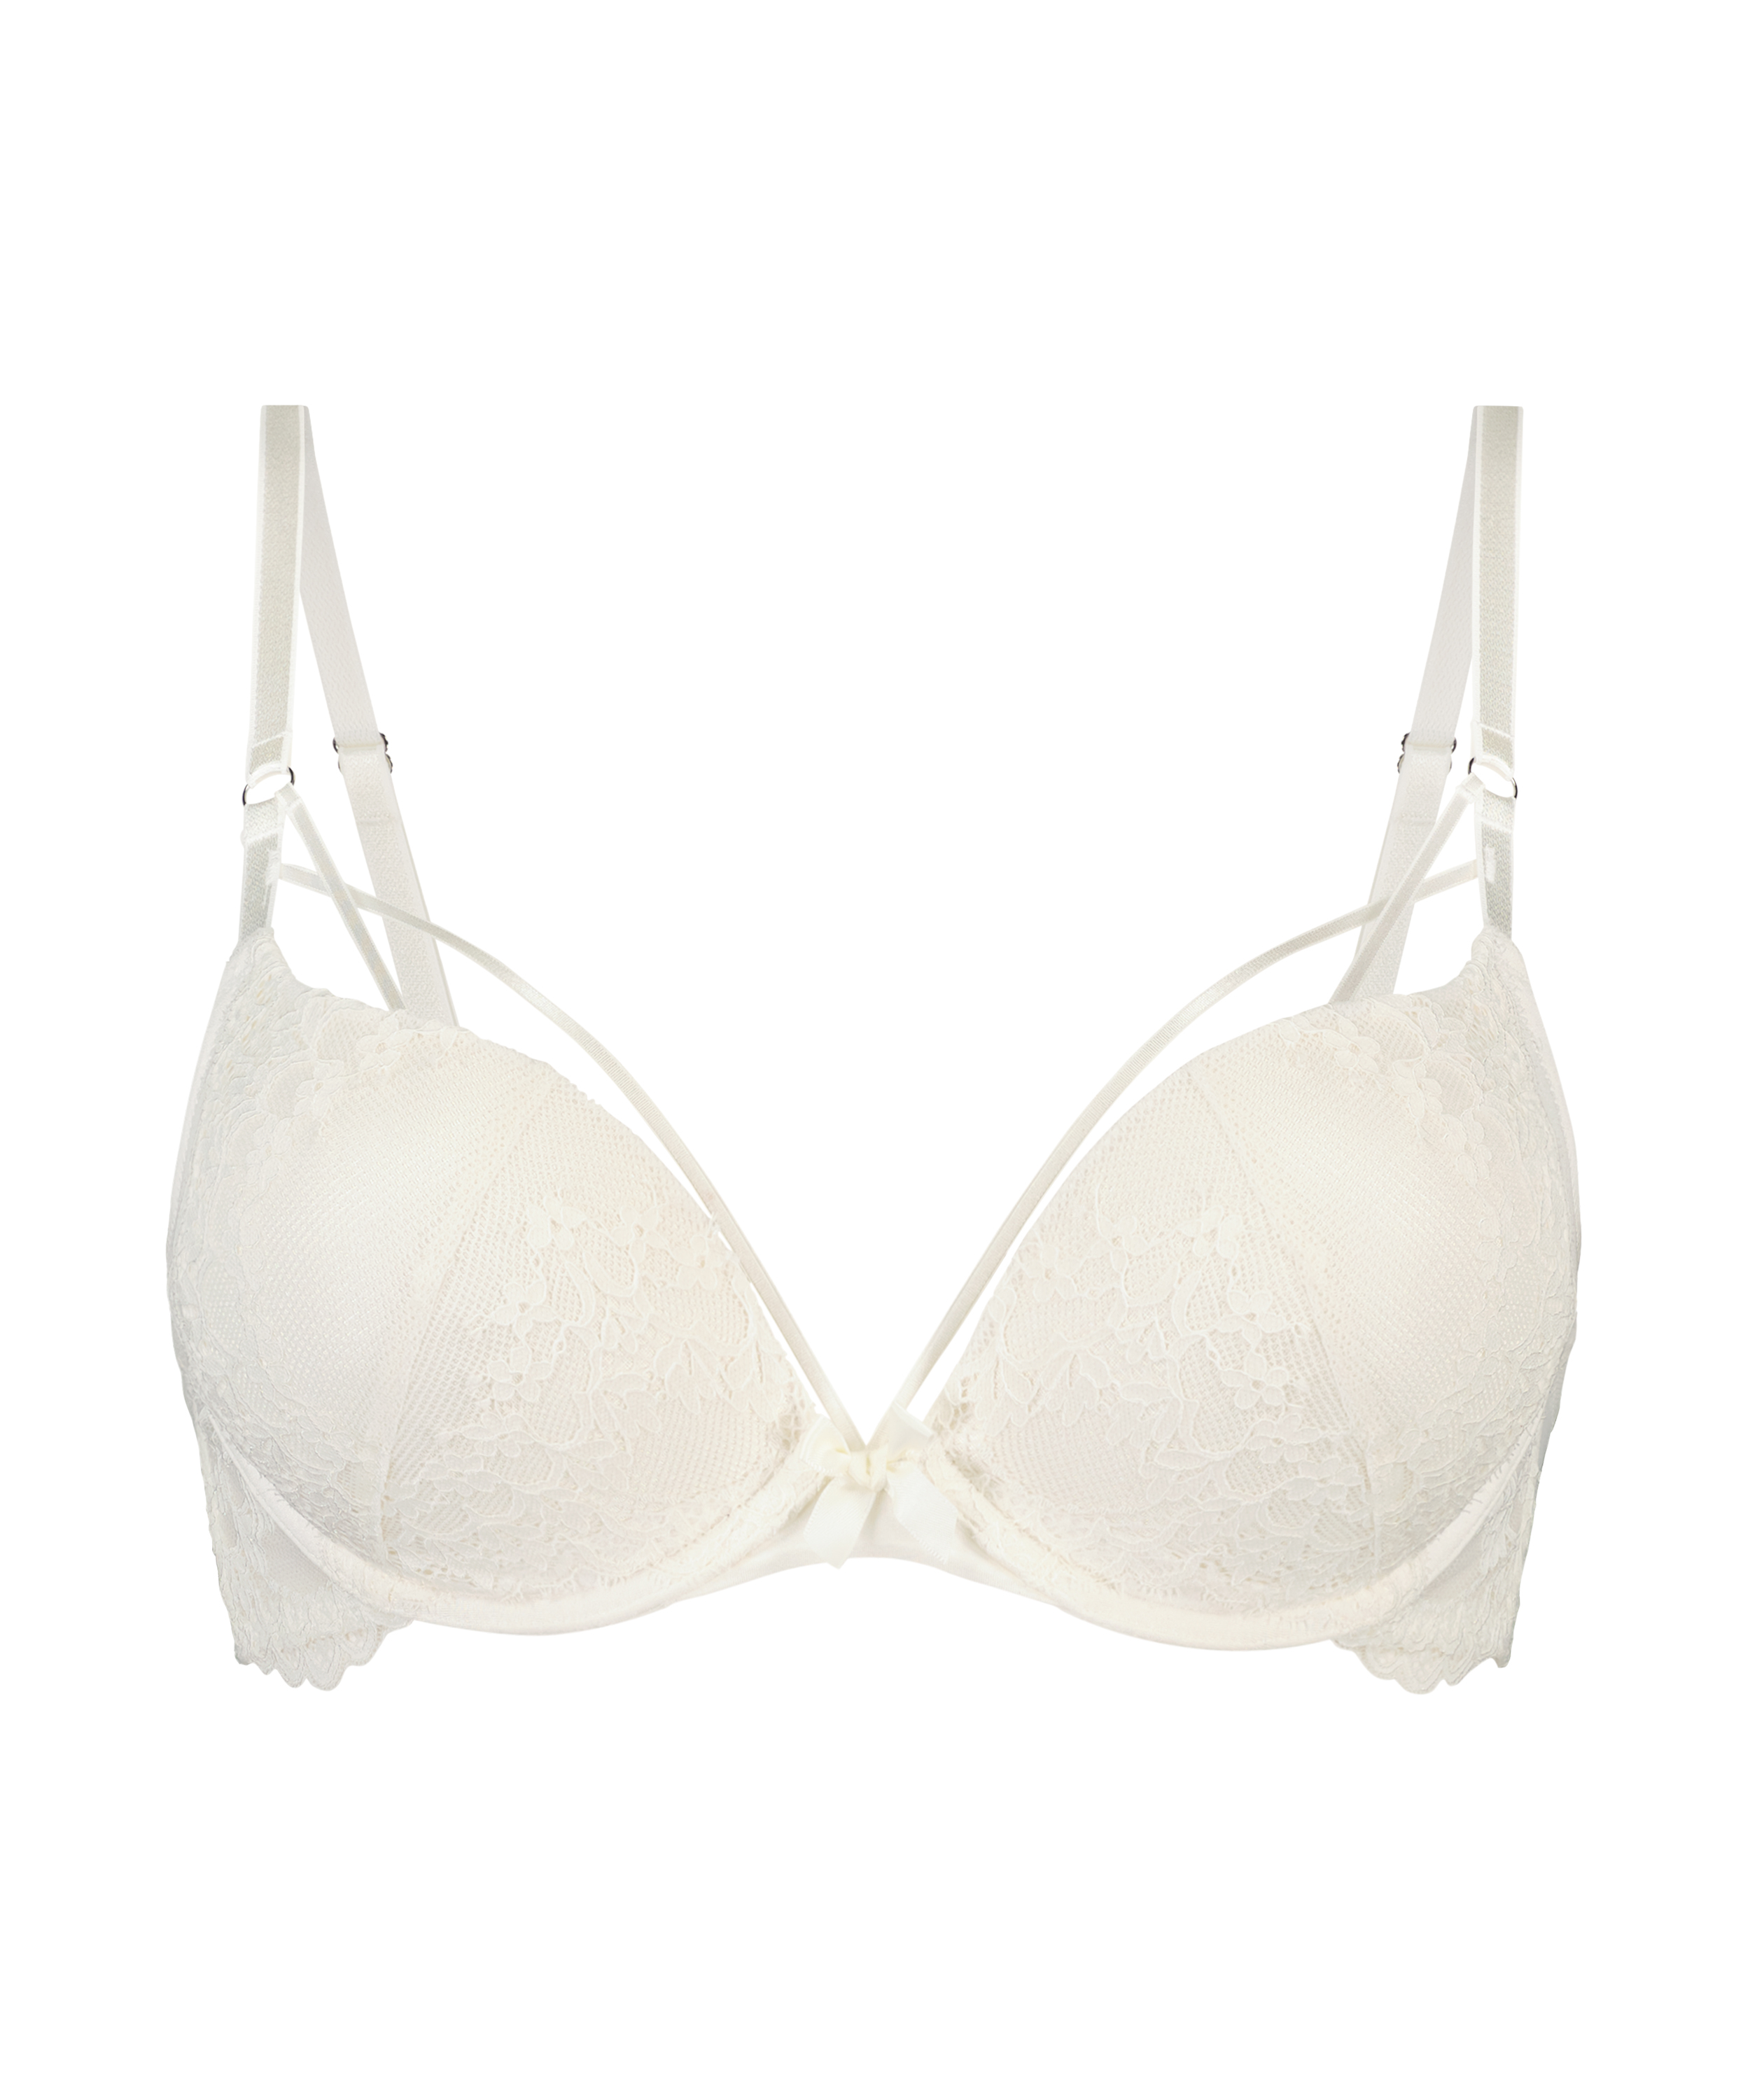 Claire Padded Underwired Maximizer Bra, White, main